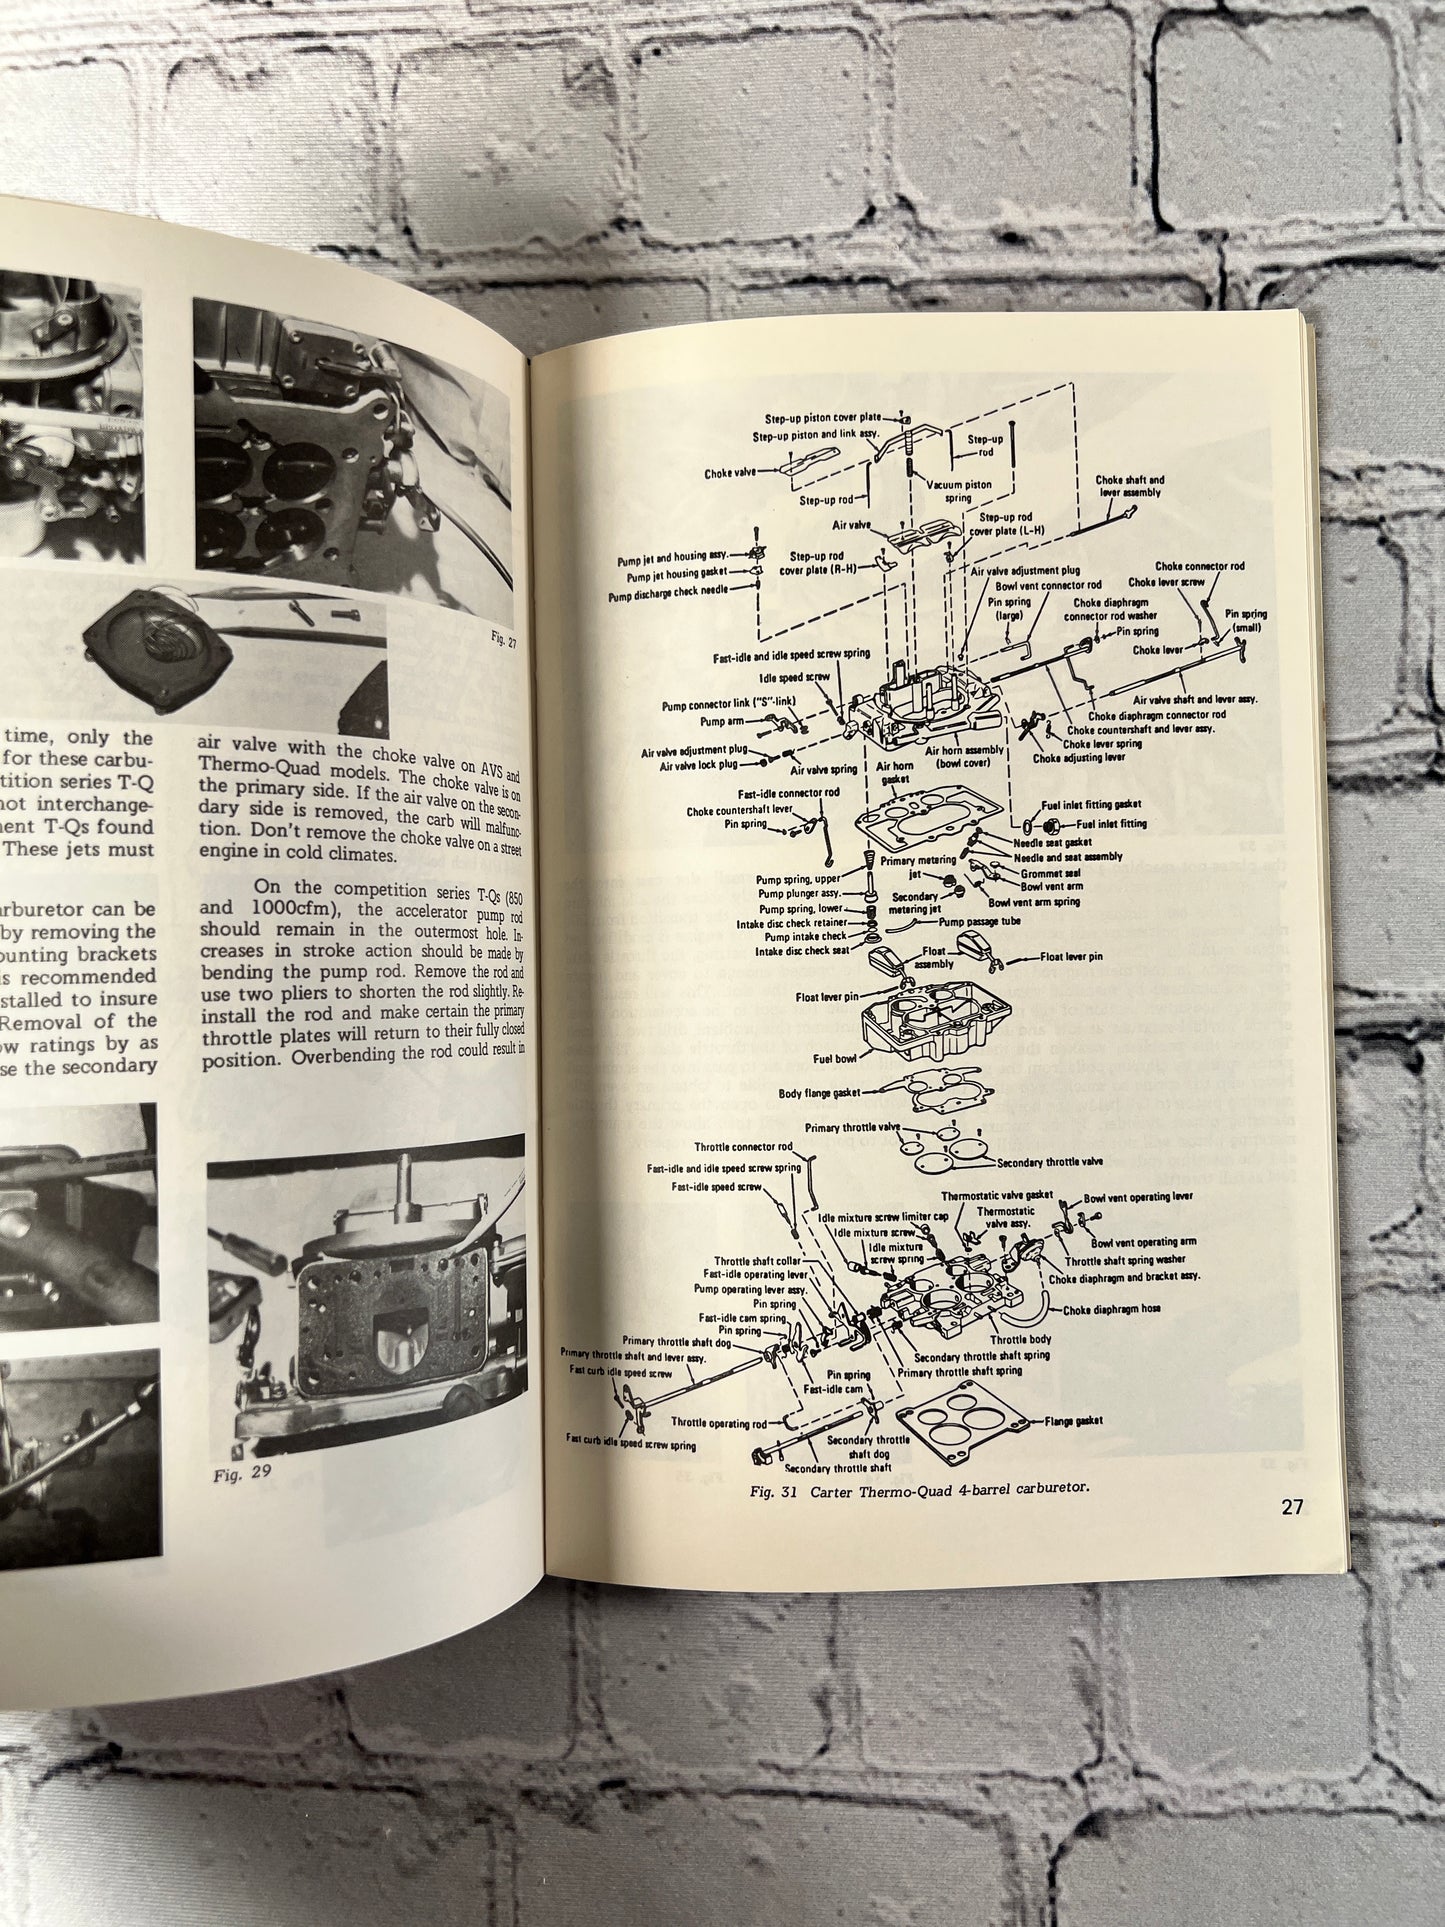 Motor Hi-Performance Tuning Guide [1973] & Auto Problem Solvers [1976]